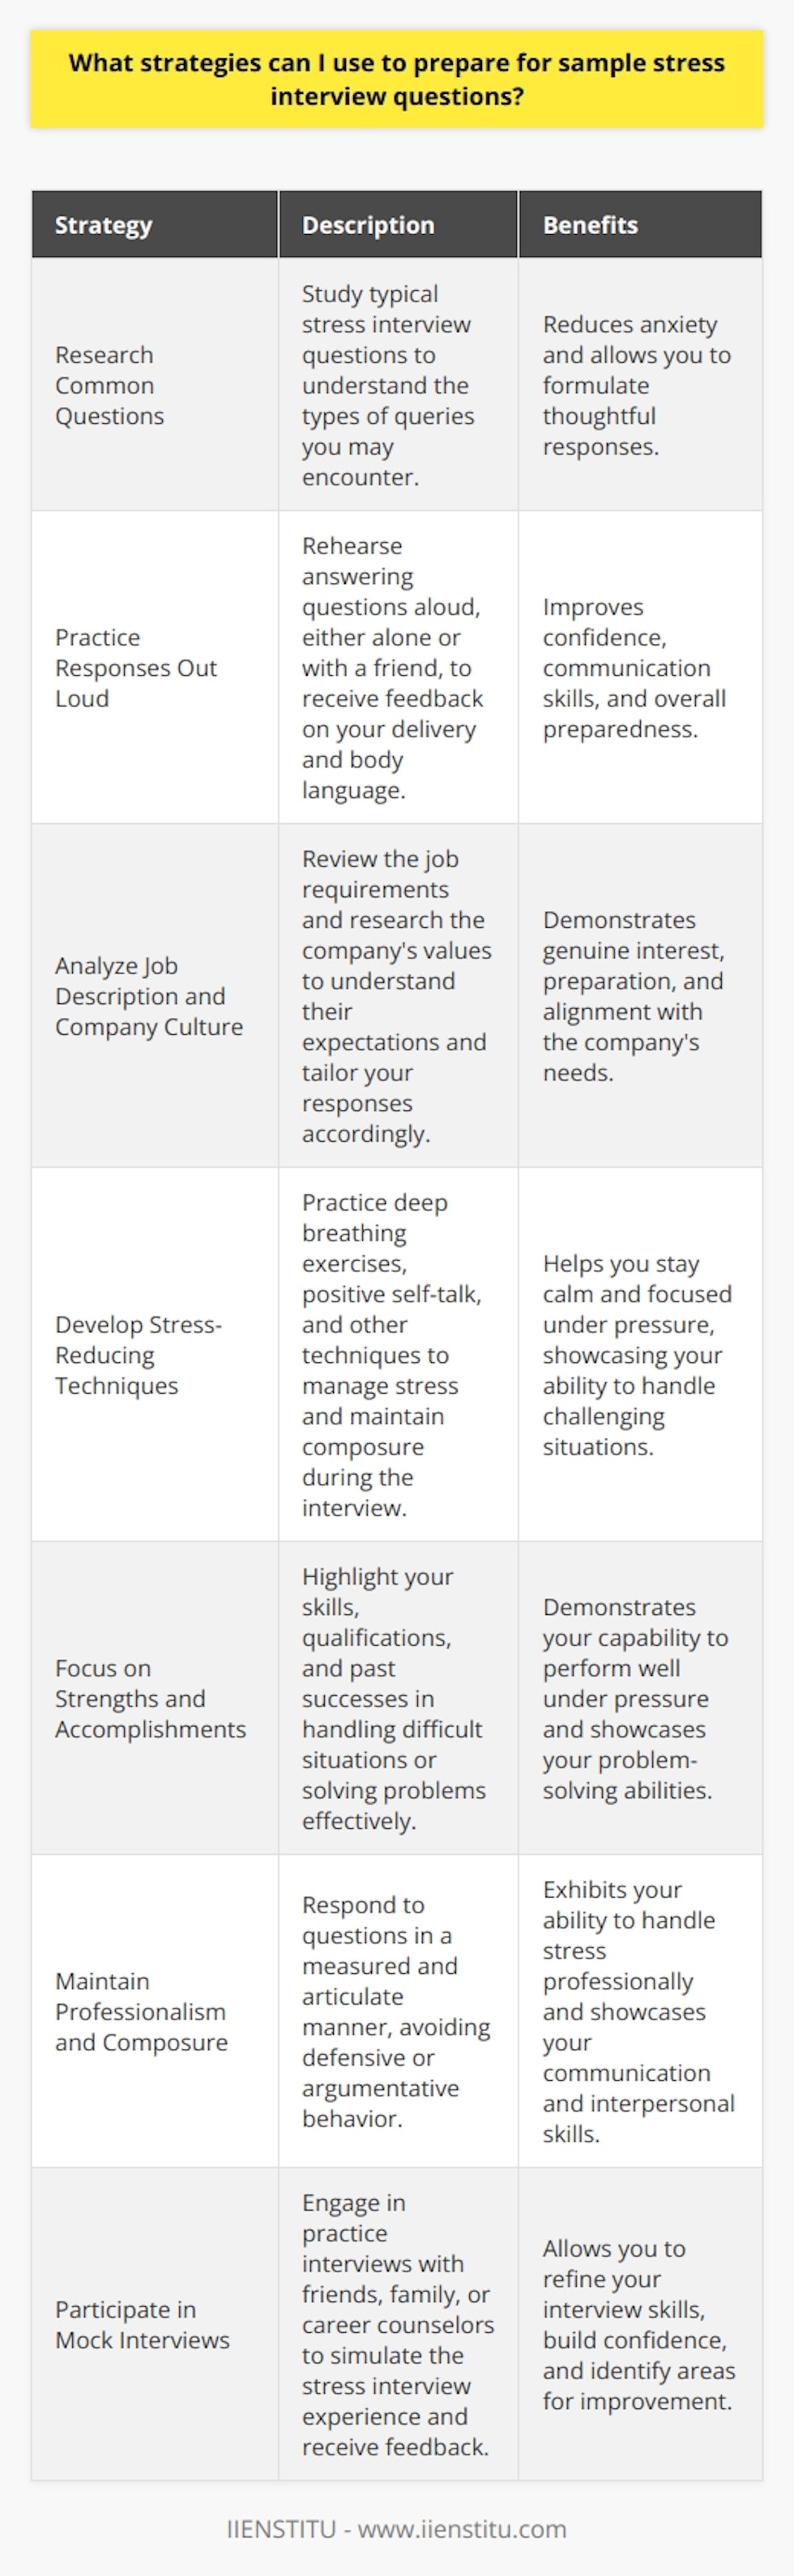 To prepare for sample stress interview questions, you can employ several strategies to boost your confidence and performance. First, research common stress interview questions and practice answering them out loud to develop your communication skills. Analyze the job description and company culture to tailor your responses to their expectations. Additionally, practice stress-reducing techniques like deep breathing and positive self-talk to maintain composure during the interview. Understand the Purpose of Stress Interview Questions Stress interview questions assess how you handle pressure and think on your feet in challenging situations. Recognizing this purpose helps you approach the questions with the right mindset and showcases your problem-solving abilities. Employers use stress interviews to gauge your adaptability, resilience, and ability to perform under pressure. Familiarize Yourself with Common Stress Interview Questions Research common stress interview questions to familiarize yourself with the types of queries you may encounter. Examples include  How do you handle conflict with a coworker?  or  Tell me about a time you failed.  Knowing what to expect reduces anxiety and allows you to formulate thoughtful responses. Practice Answering Questions Out Loud Rehearse answering stress interview questions out loud to improve your delivery and confidence. Practice in front of a mirror or with a friend to receive feedback on your body language and tone. Regularly practicing your responses helps you feel more prepared and self-assured during the actual interview. Analyze the Job Description and Company Culture Thoroughly review the job description and research the company culture to understand their expectations and values. Tailor your responses to highlight how your skills and experiences align with their requirements. Demonstrating your knowledge of the company and position shows genuine interest and preparation. Develop Stress-Reducing Techniques Implement stress-reducing techniques to maintain composure during the interview. Practice deep breathing exercises to calm your nerves and clear your mind. Engage in positive self-talk to boost your confidence and reframe any negative thoughts. Regularly practicing these techniques helps you manage stress more effectively in high-pressure situations. Focus on Your Strengths and Accomplishments When answering stress interview questions, focus on your strengths and accomplishments. Provide concrete examples of how you successfully handled challenging situations in the past. Highlighting your achievements demonstrates your capability to perform well under pressure and solve problems effectively. Maintain Professionalism and Composure Throughout the stress interview, maintain professionalism and composure in your demeanor and responses. Avoid becoming defensive or argumentative, even if the questions seem confrontational. Remain calm, take a moment to collect your thoughts, and respond in a measured and articulate manner. Learn from Mock Interviews and Seek Feedback Participate in mock interviews with friends, family, or career counselors to simulate the stress interview experience. Request feedback on your performance, including your responses, body language, and overall presentation. Incorporating constructive criticism helps you refine your interview skills and build confidence. By implementing these strategies, you can effectively prepare for sample stress interview questions and increase your chances of success. Remember, the key is to remain confident, focused, and composed while showcasing your qualifications and fit for the role.